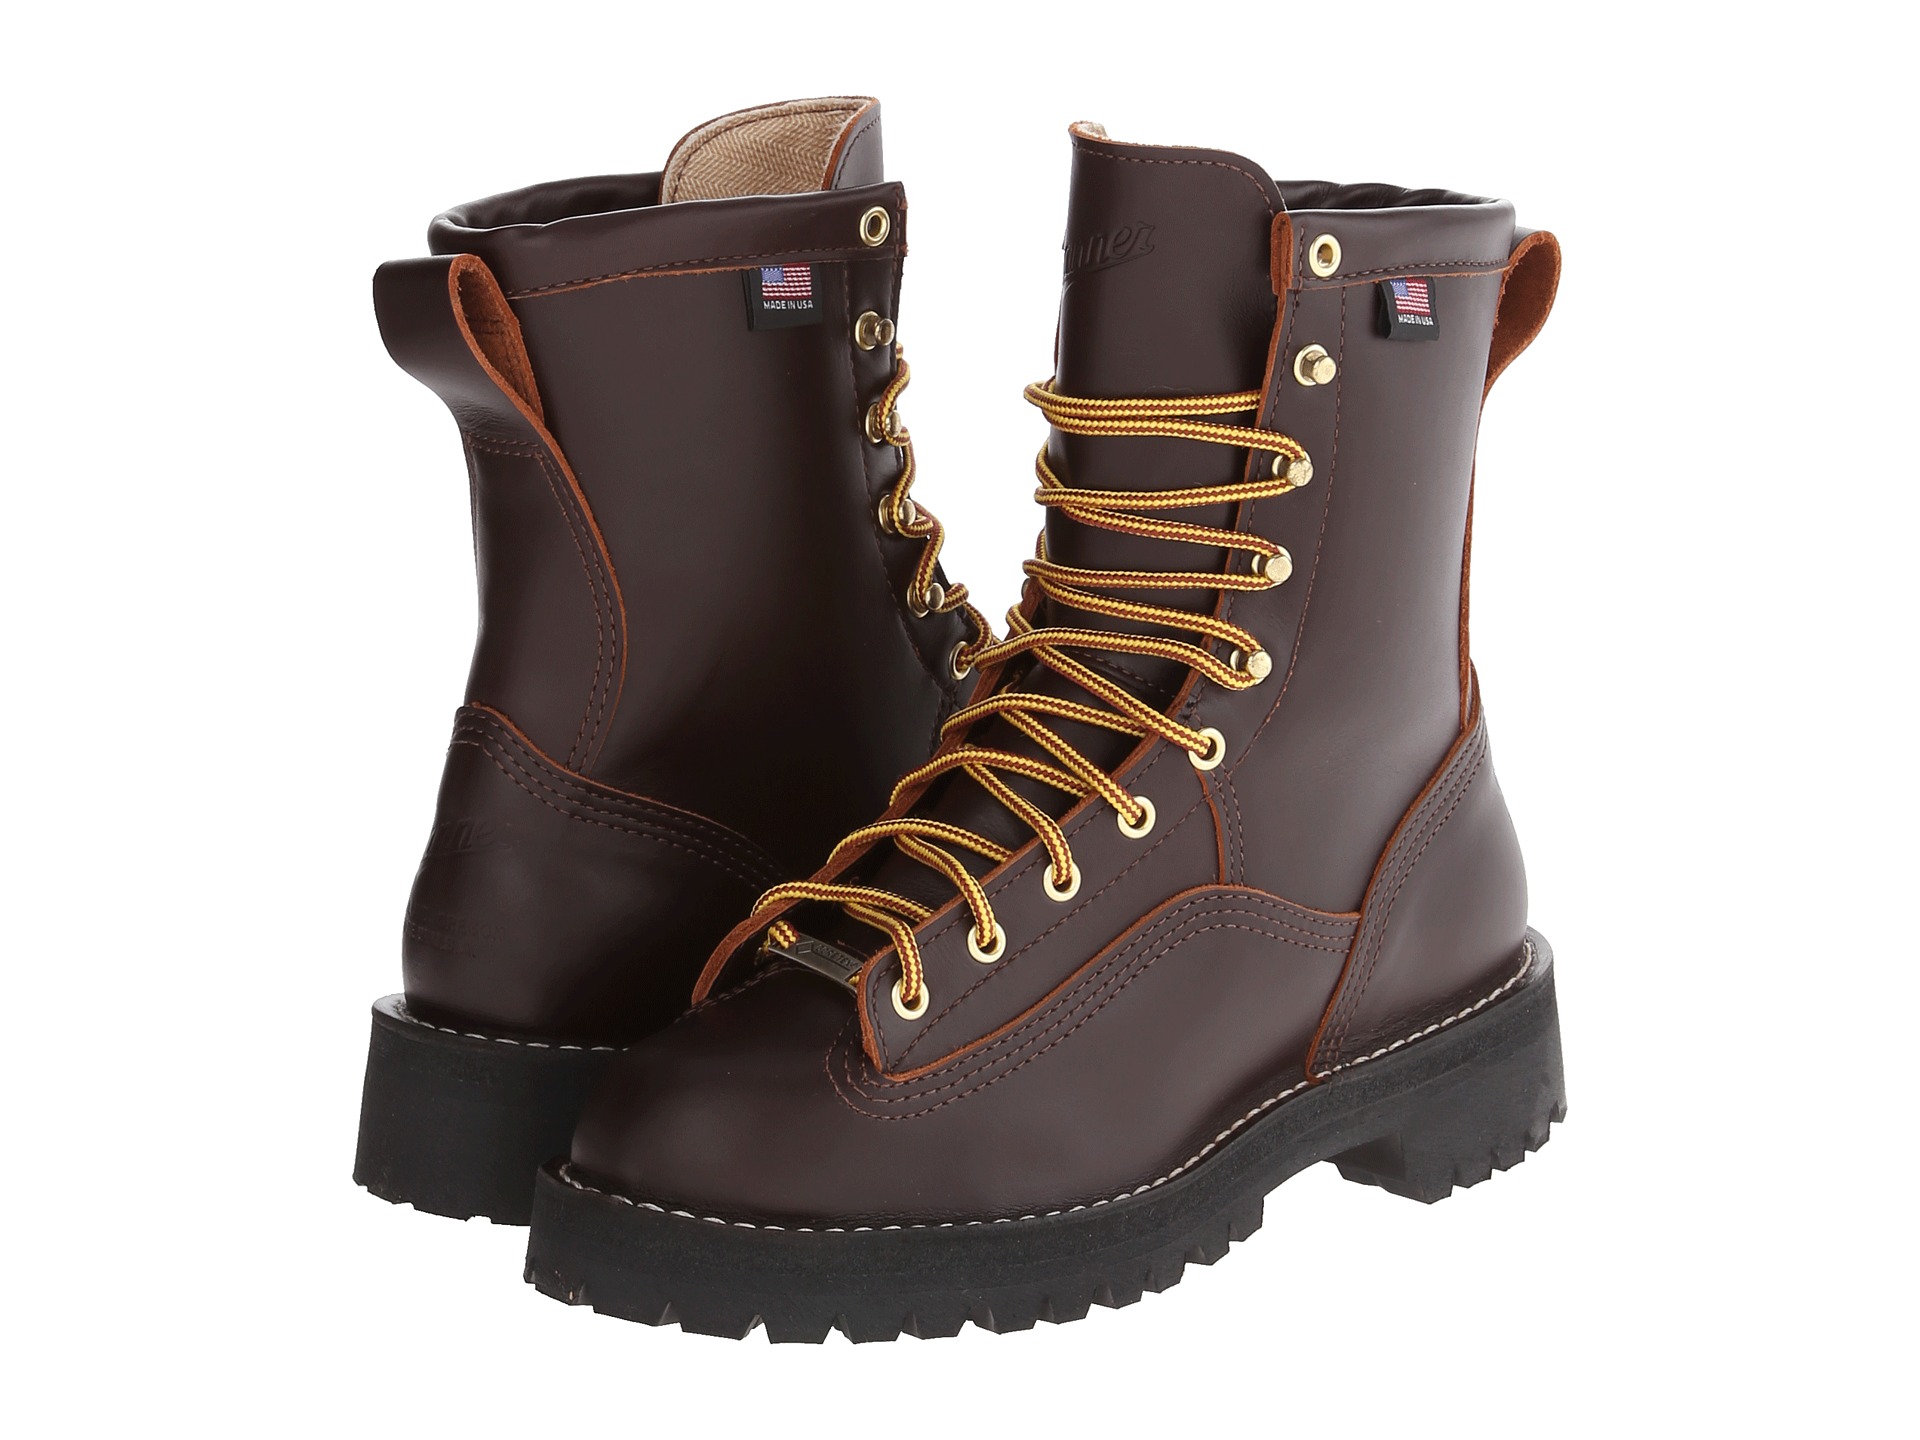 Danner Rain Forest 8 | Shipped Free at Zappos